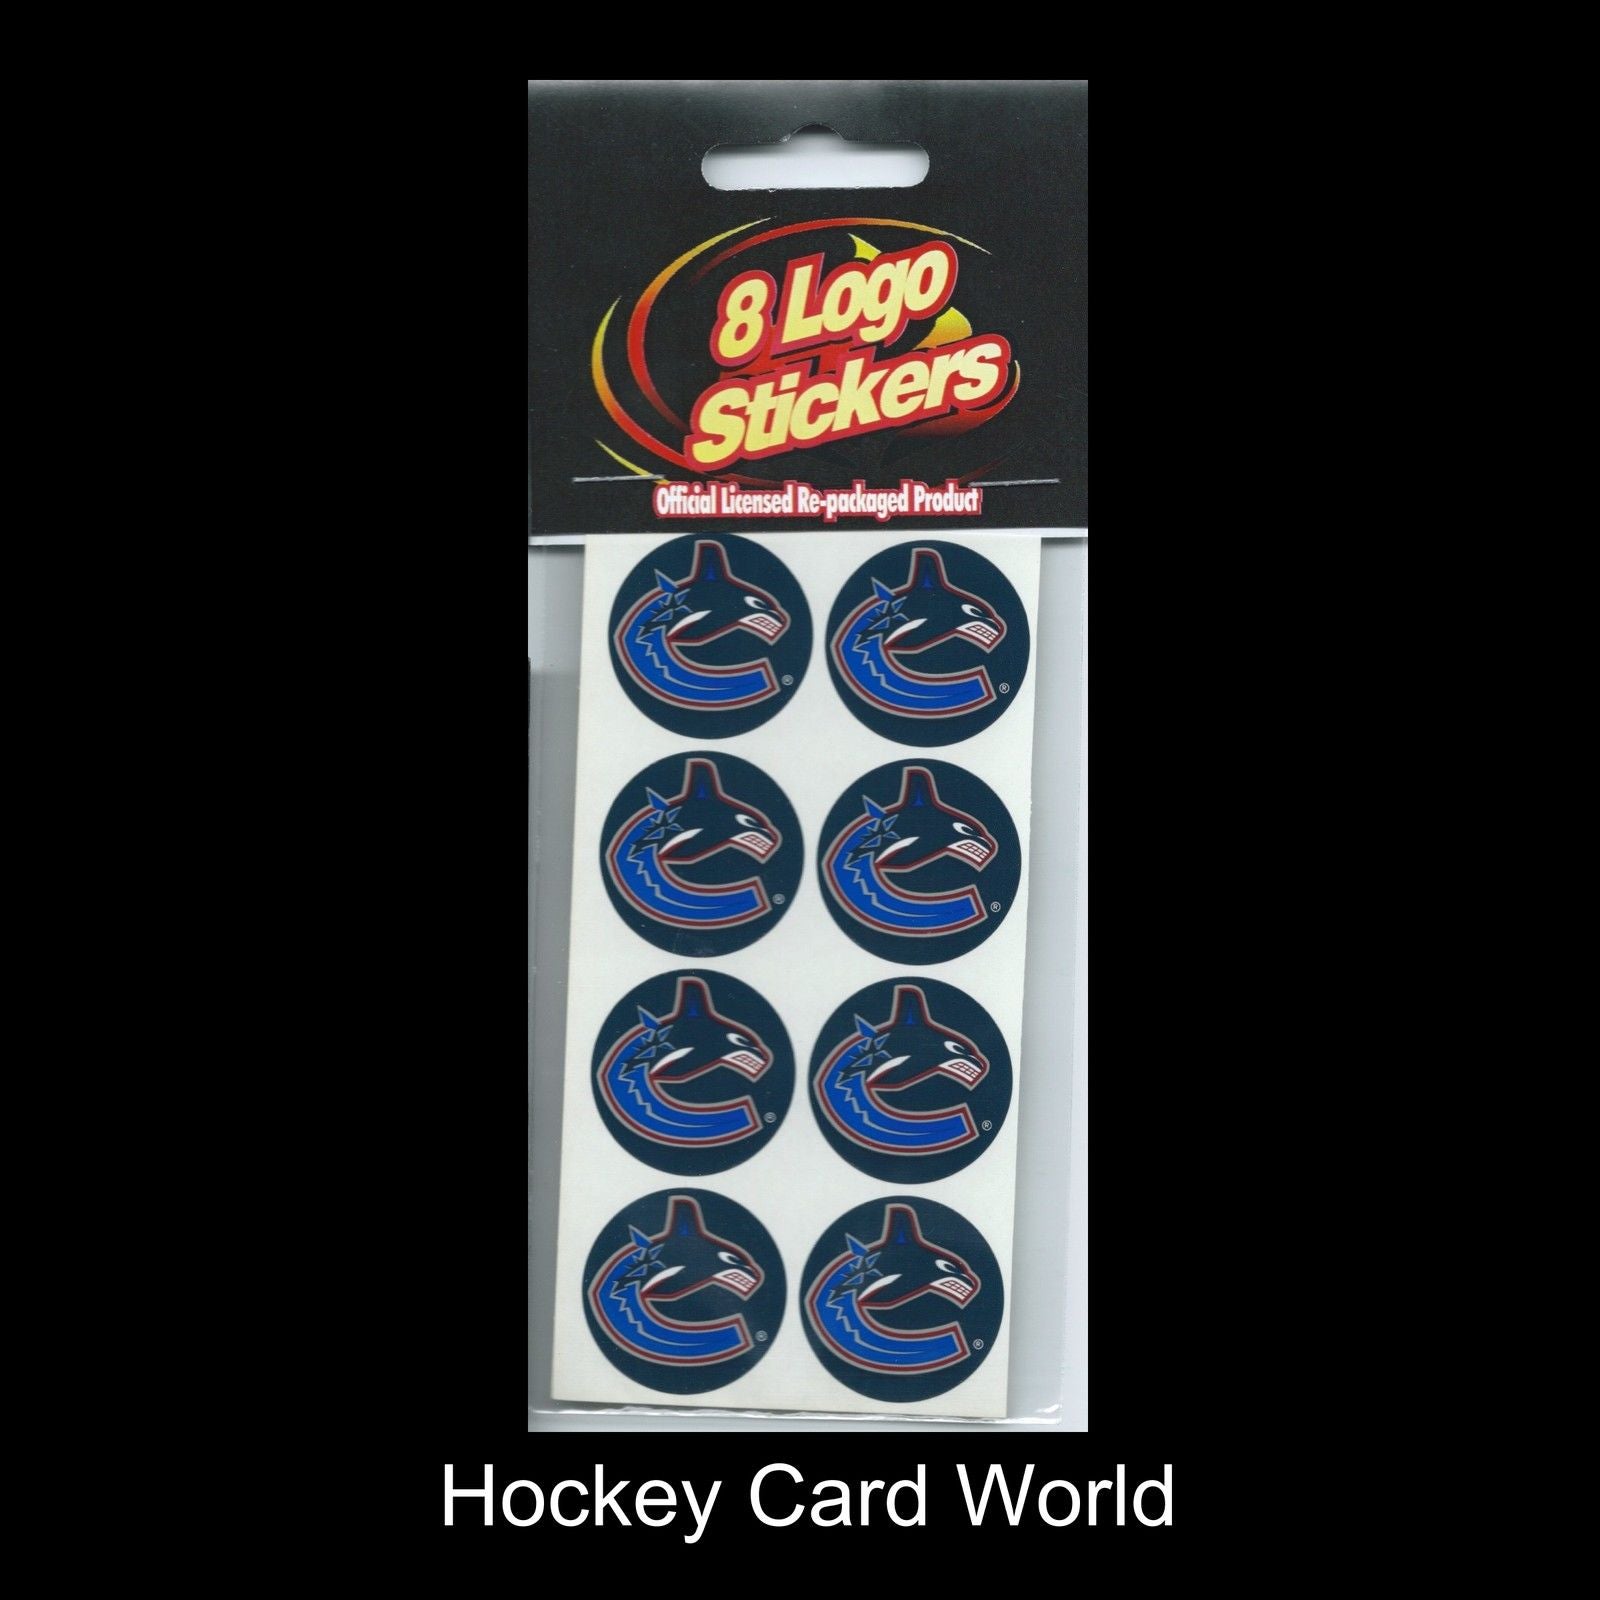  Vancouver Canucks NHL Official Licensed 8 Stickers Decal Sheet 2.5" x 5" Image 1